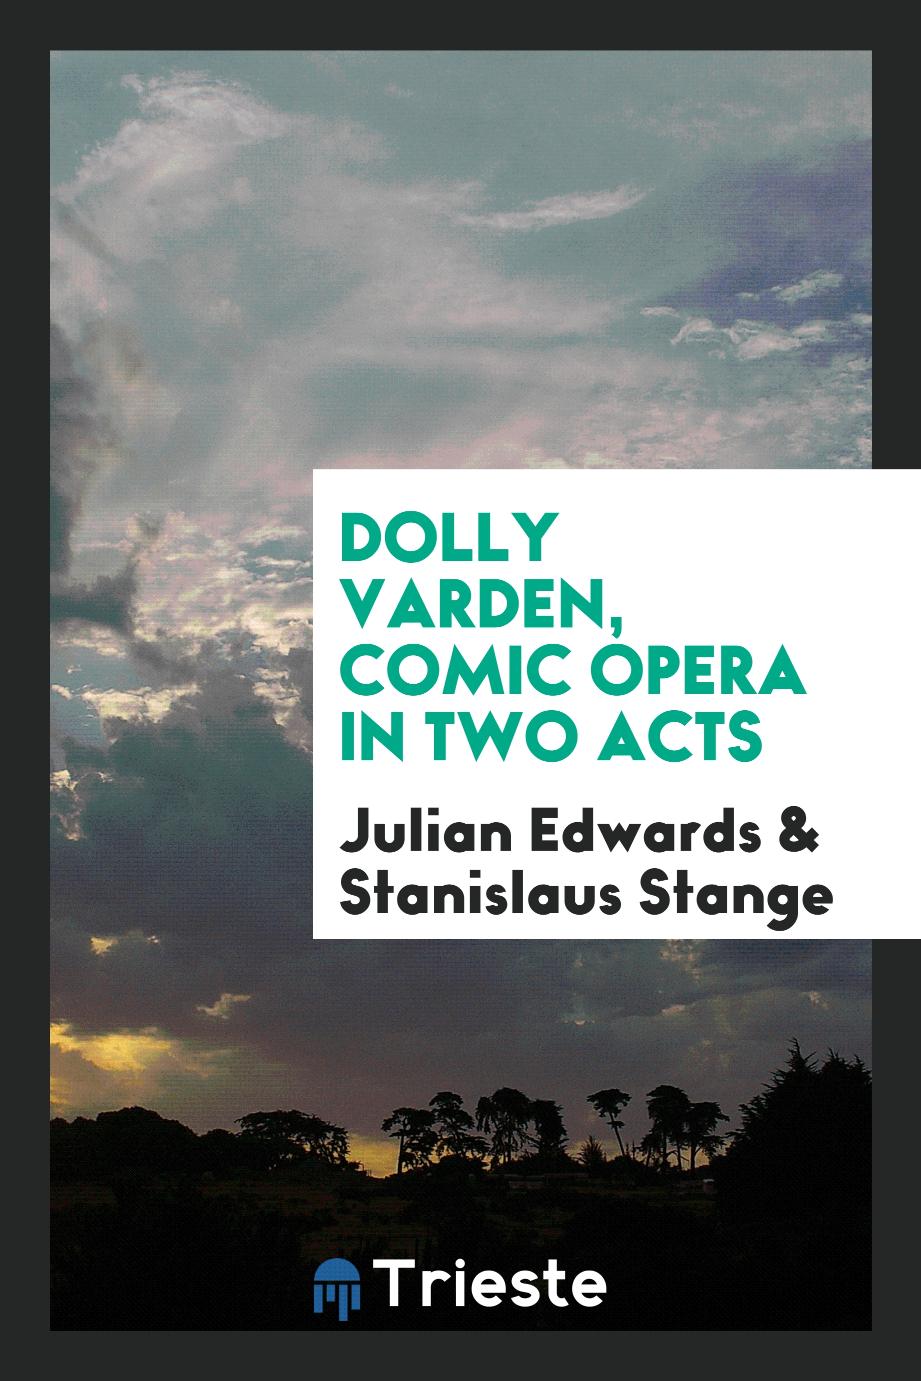 Dolly Varden, comic opera in two acts